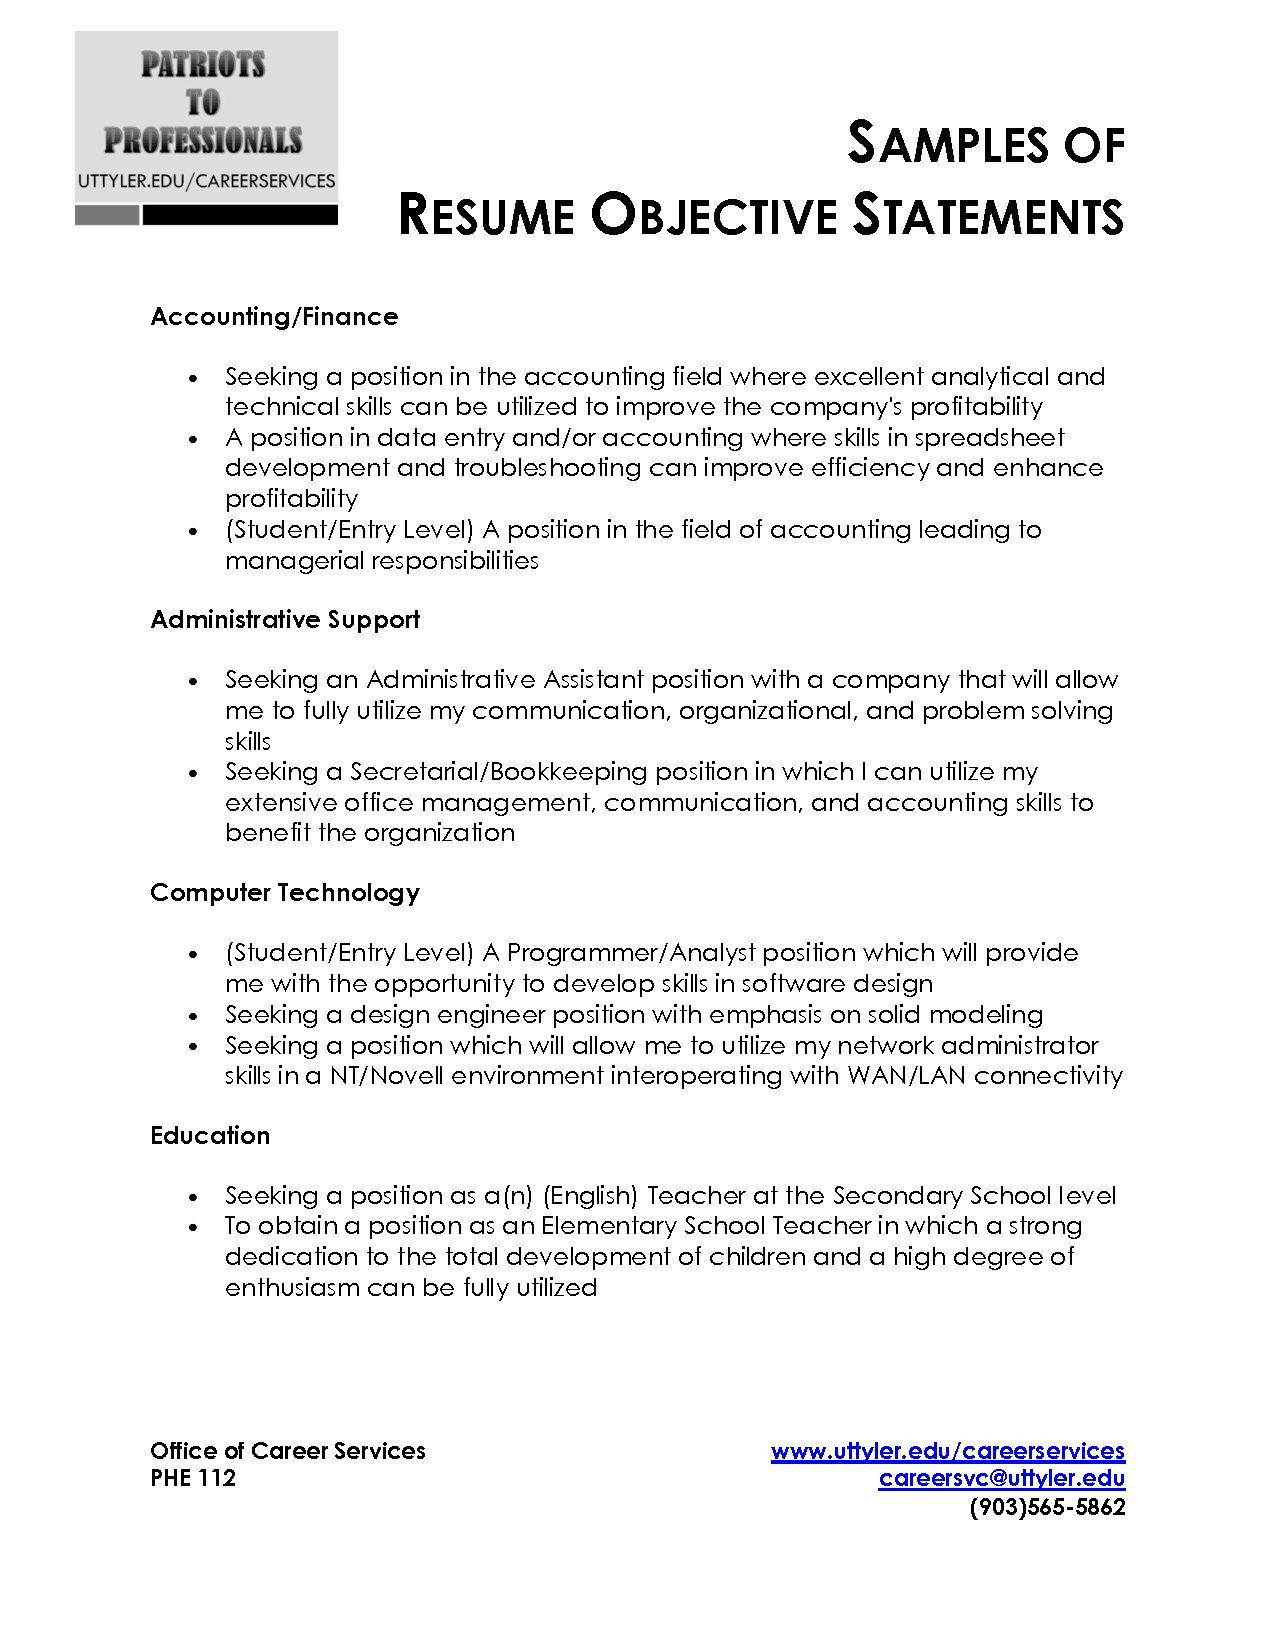 Sample Resume Objective Statements for Students Sample Resume Objective Statement Free Resume Templates Resume …